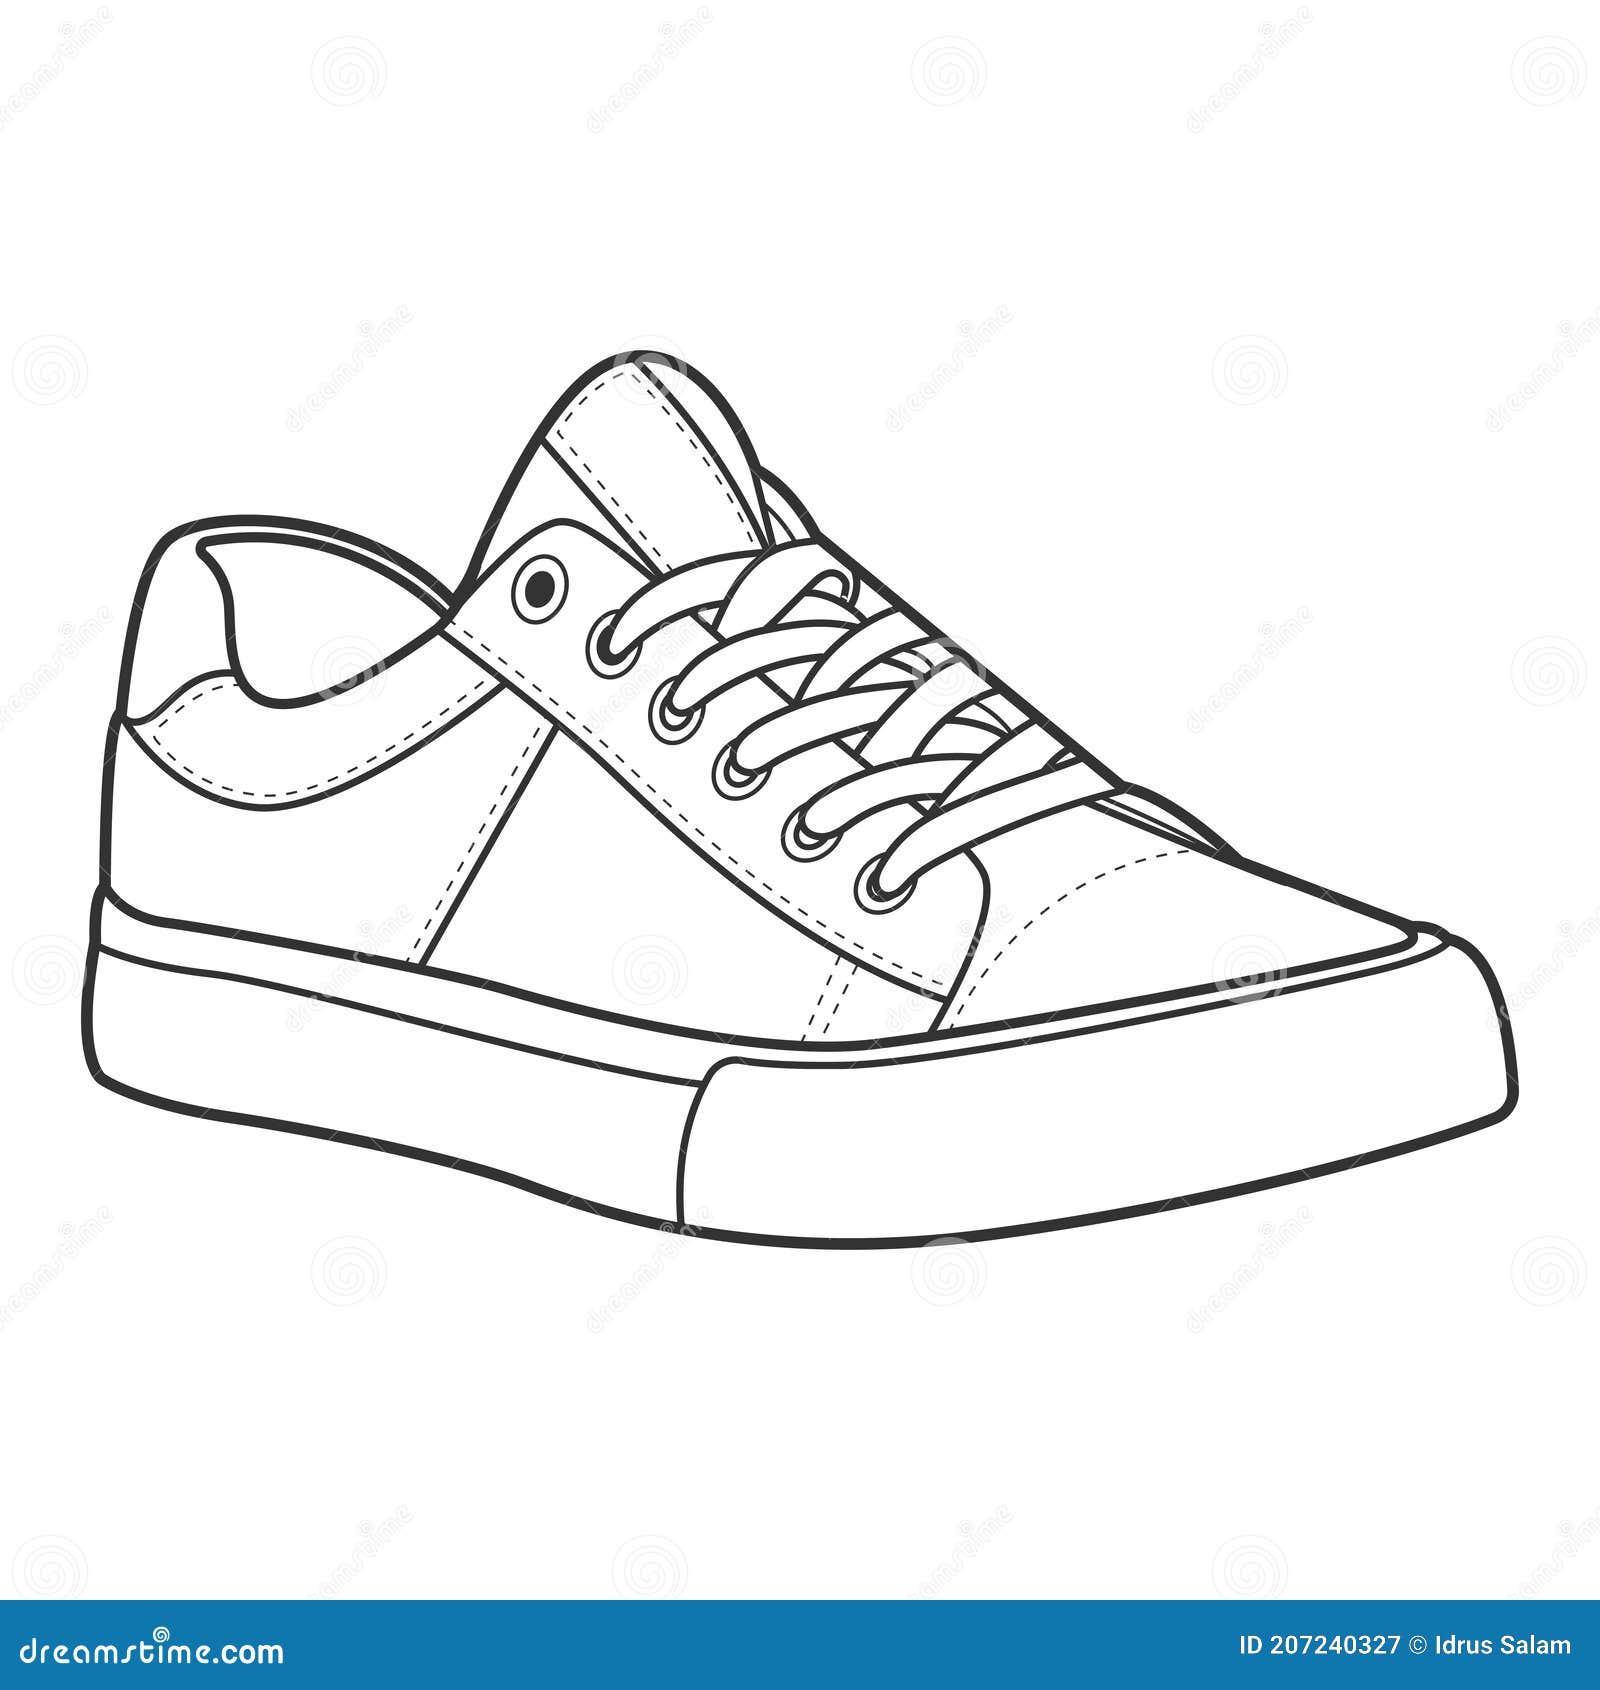 How to Draw Sneakers / Shoes with Easy Step by Step Drawing Tutorial for  Beginners - How to Draw Step by Step Drawing Tutorials